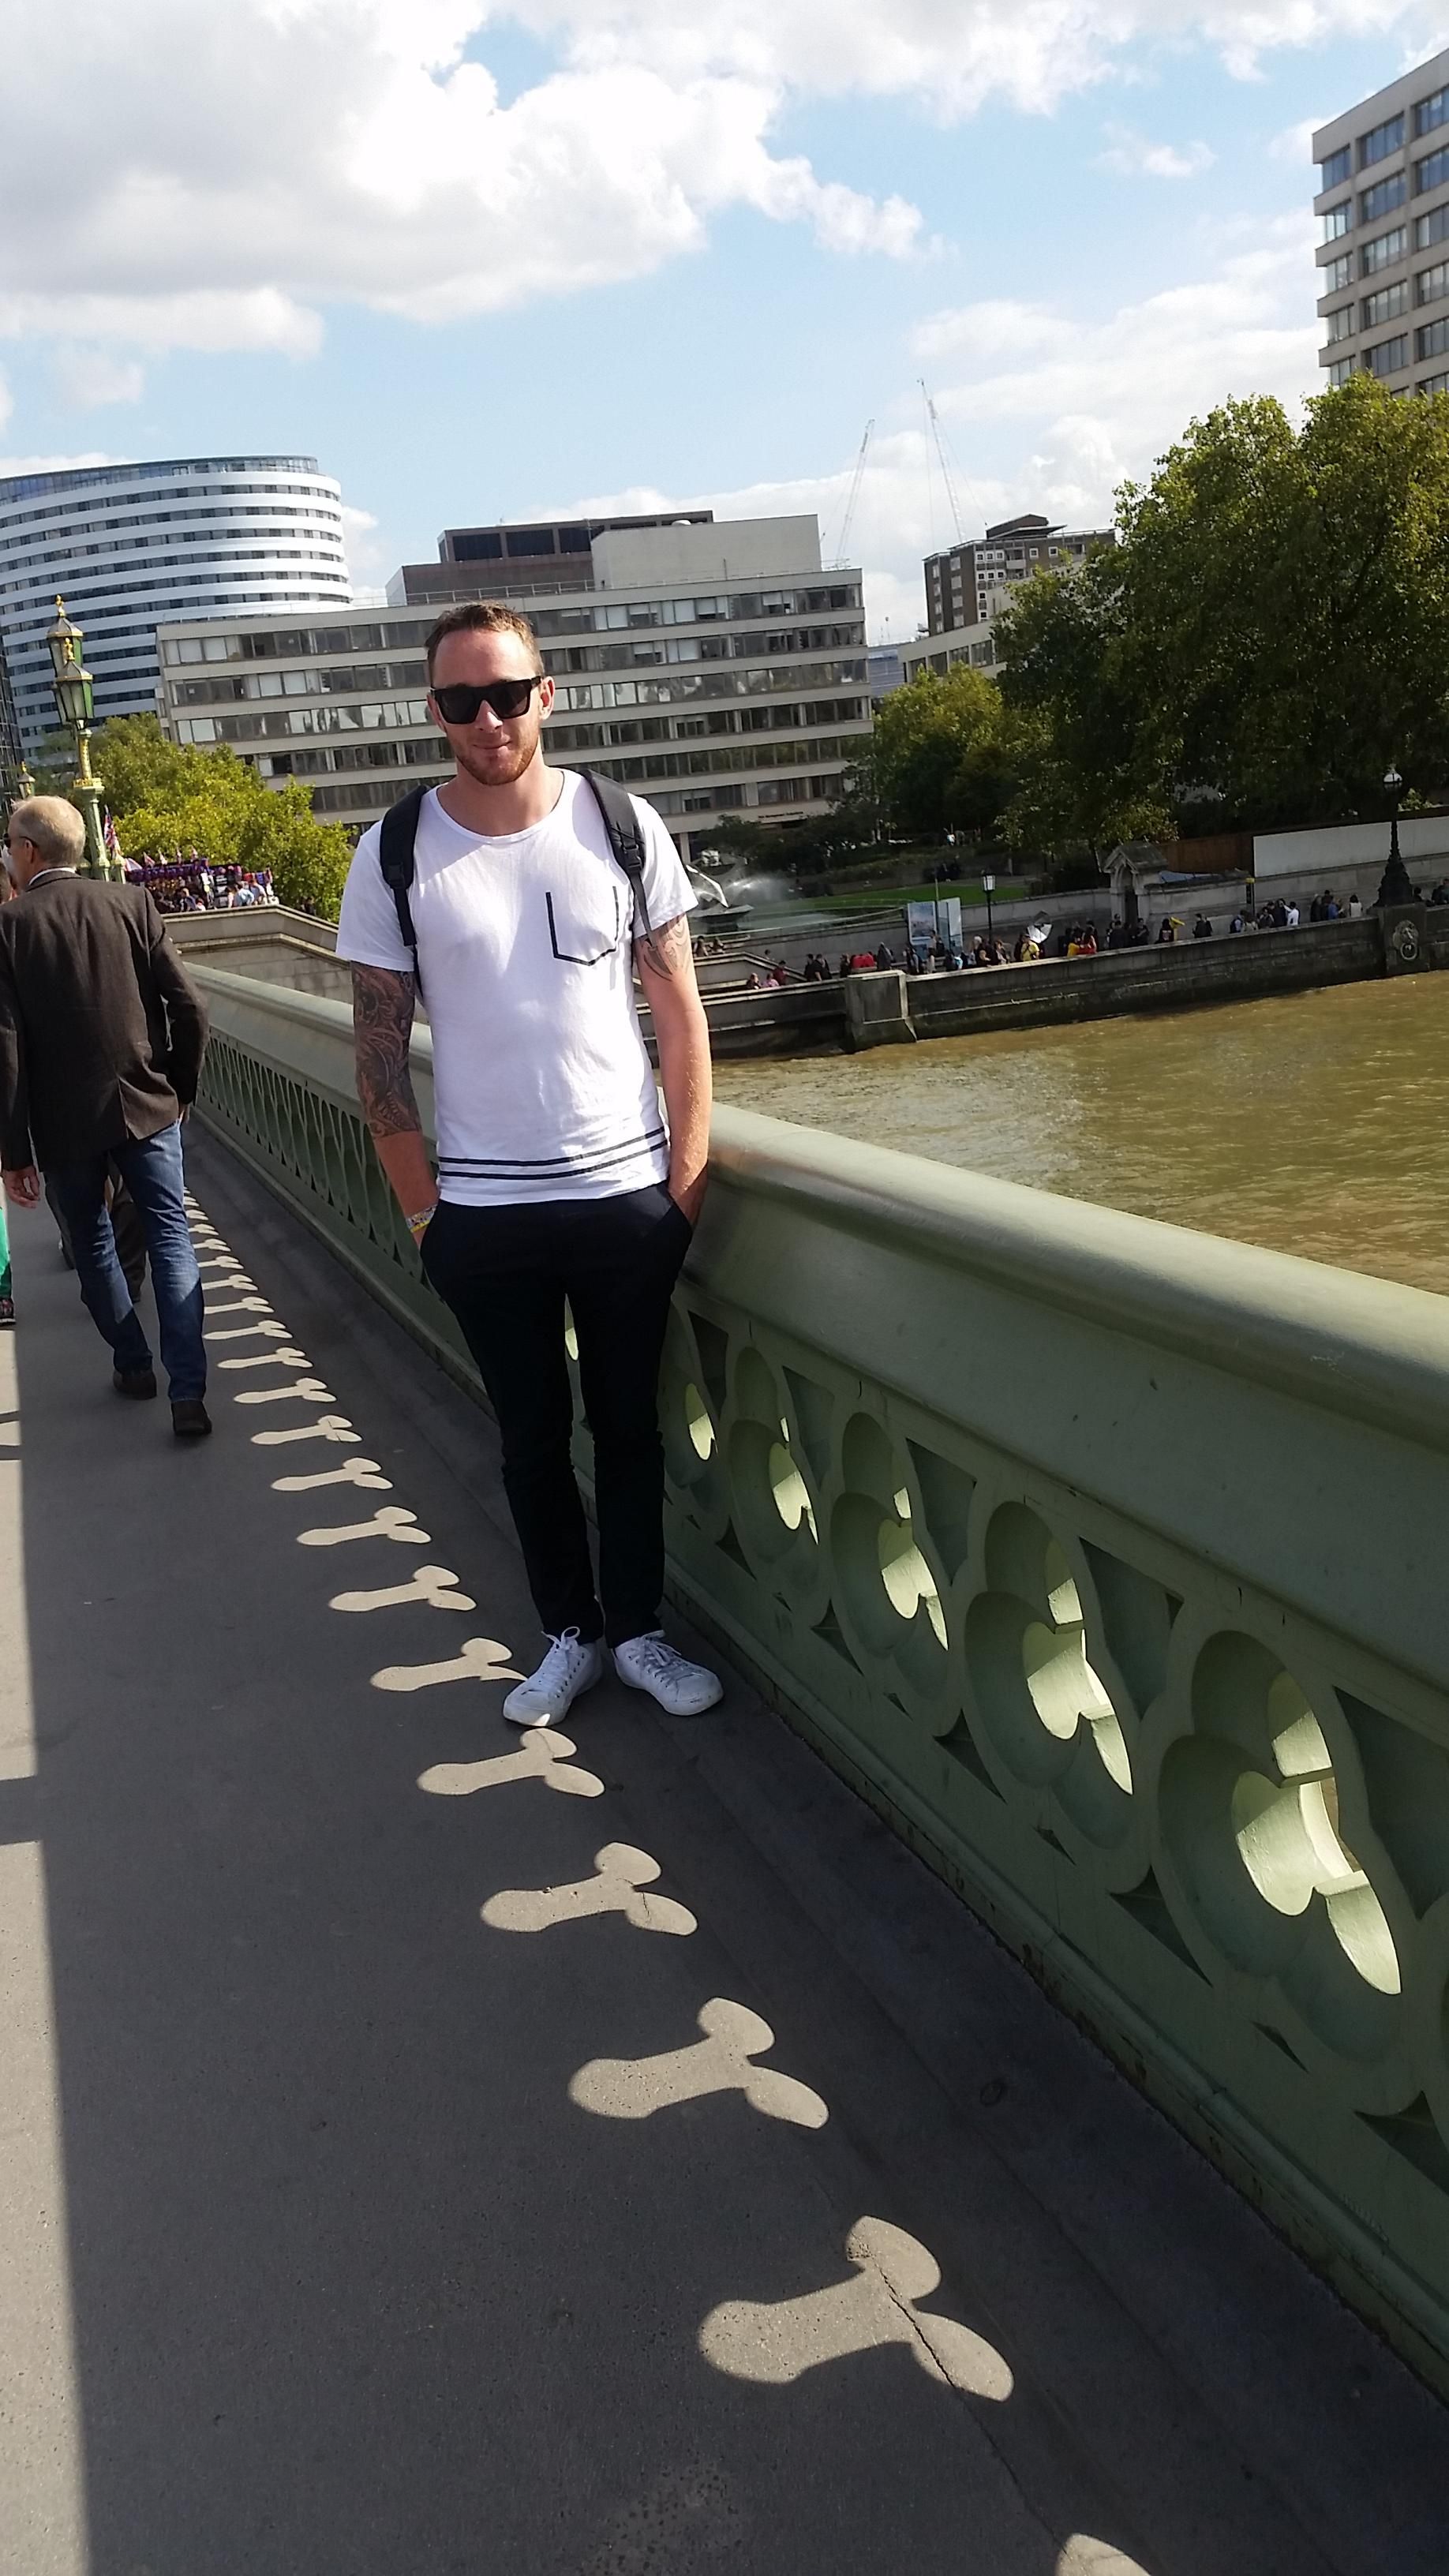 At the time my girlfriend didn't know why i wanted my photo taken on this side of the bridge.